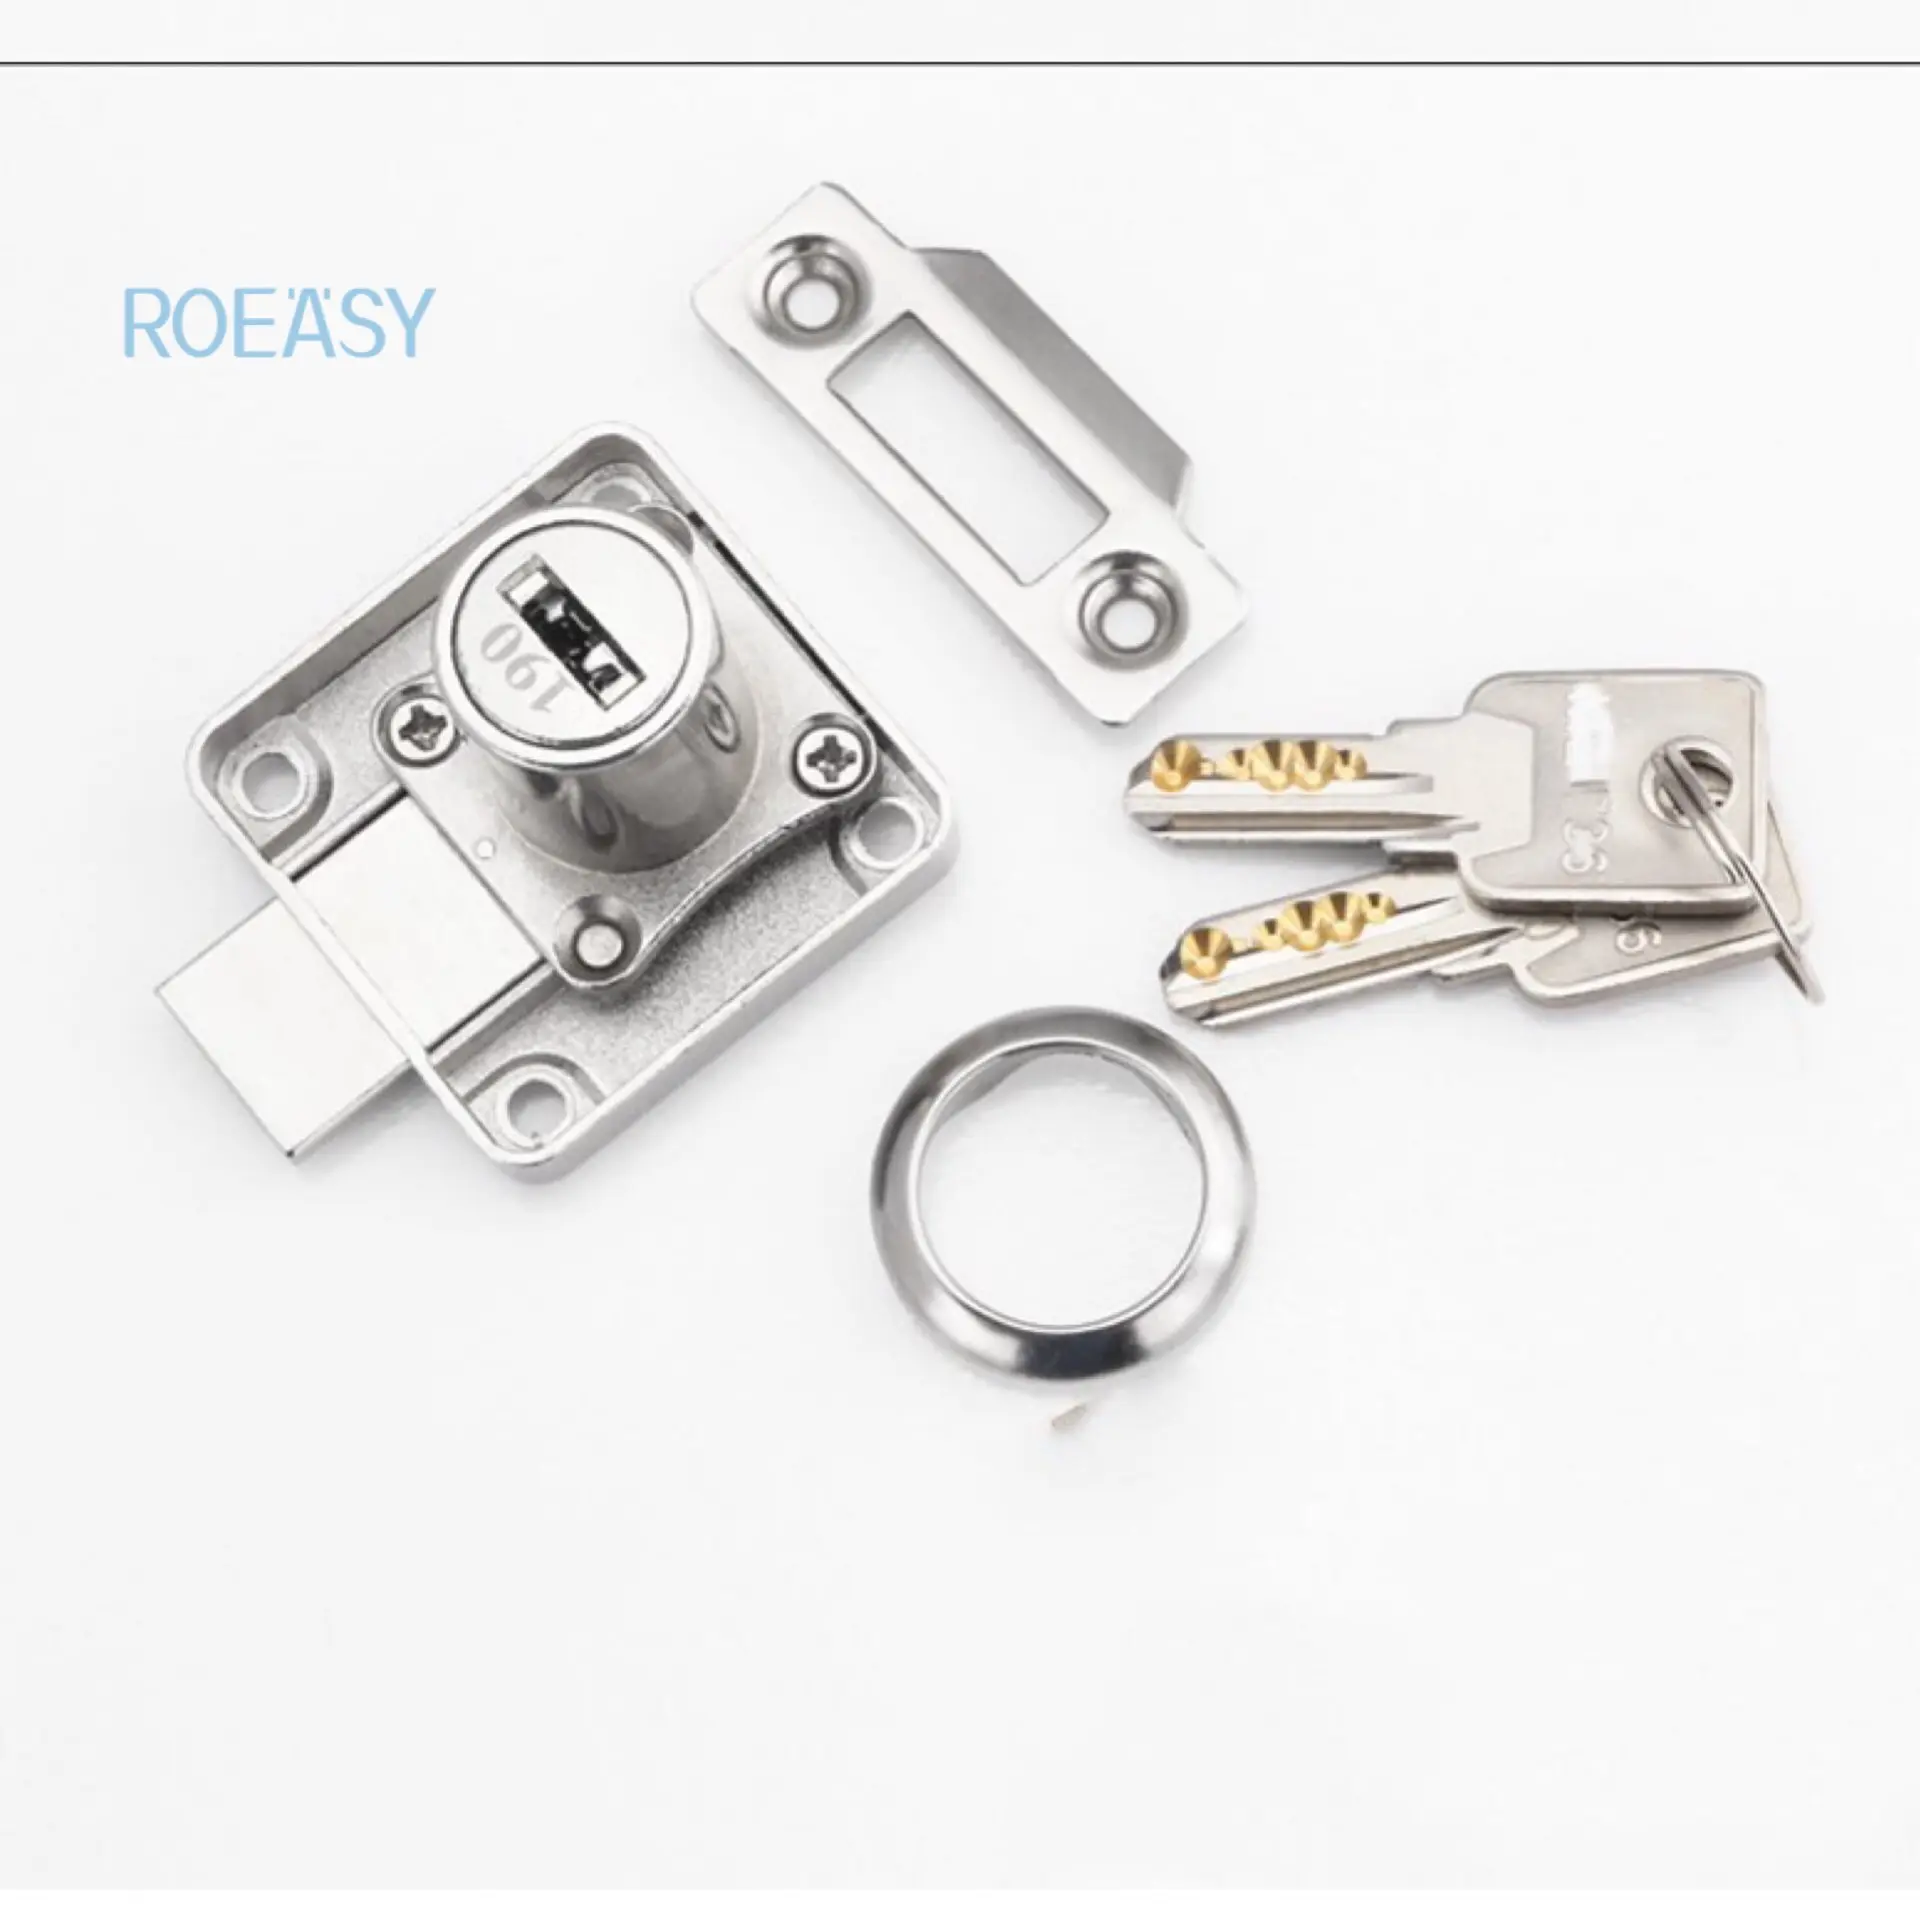 ROEASY DRAWER LOCK 138N-22 furniture lock with 3mm latch with 32mm/22mm cylinder high quality cabinet lock